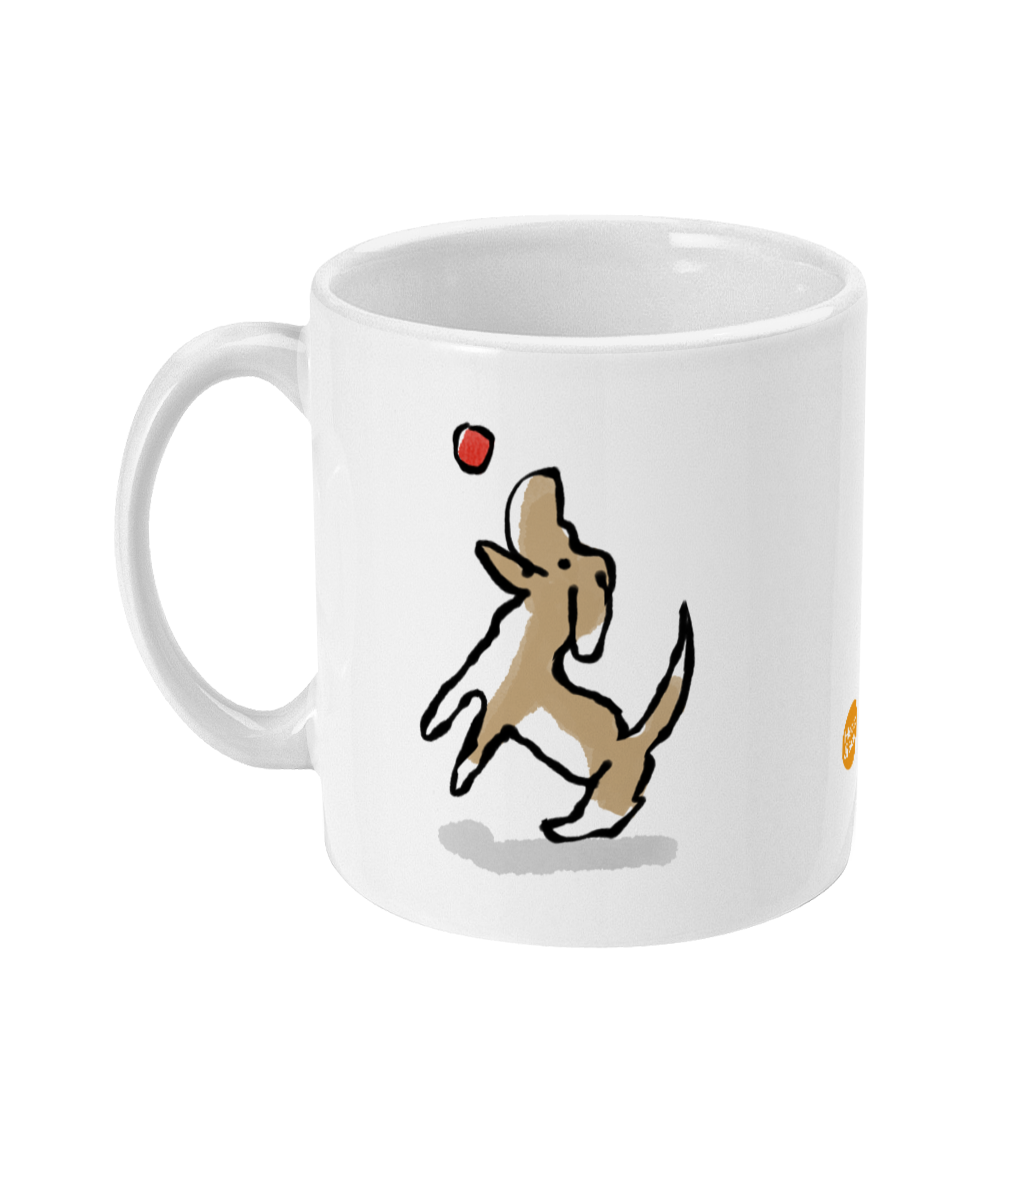 Jumping Dog design coffee mug by Hector and Bone Left View